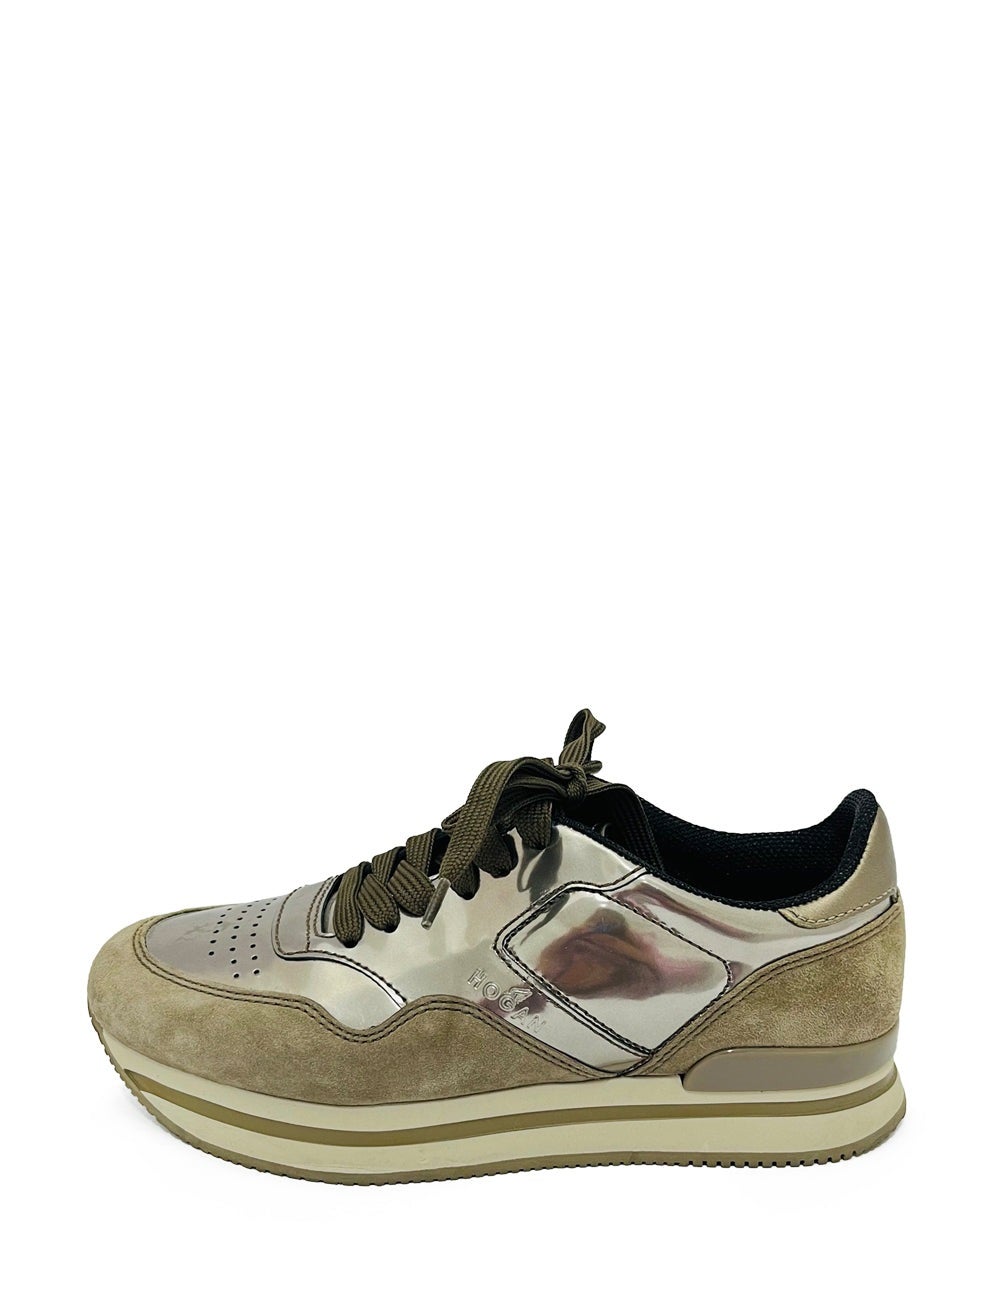 Hogan EU 37 Grey Metallic Patent Leather Sneakers For Sale at 1stDibs